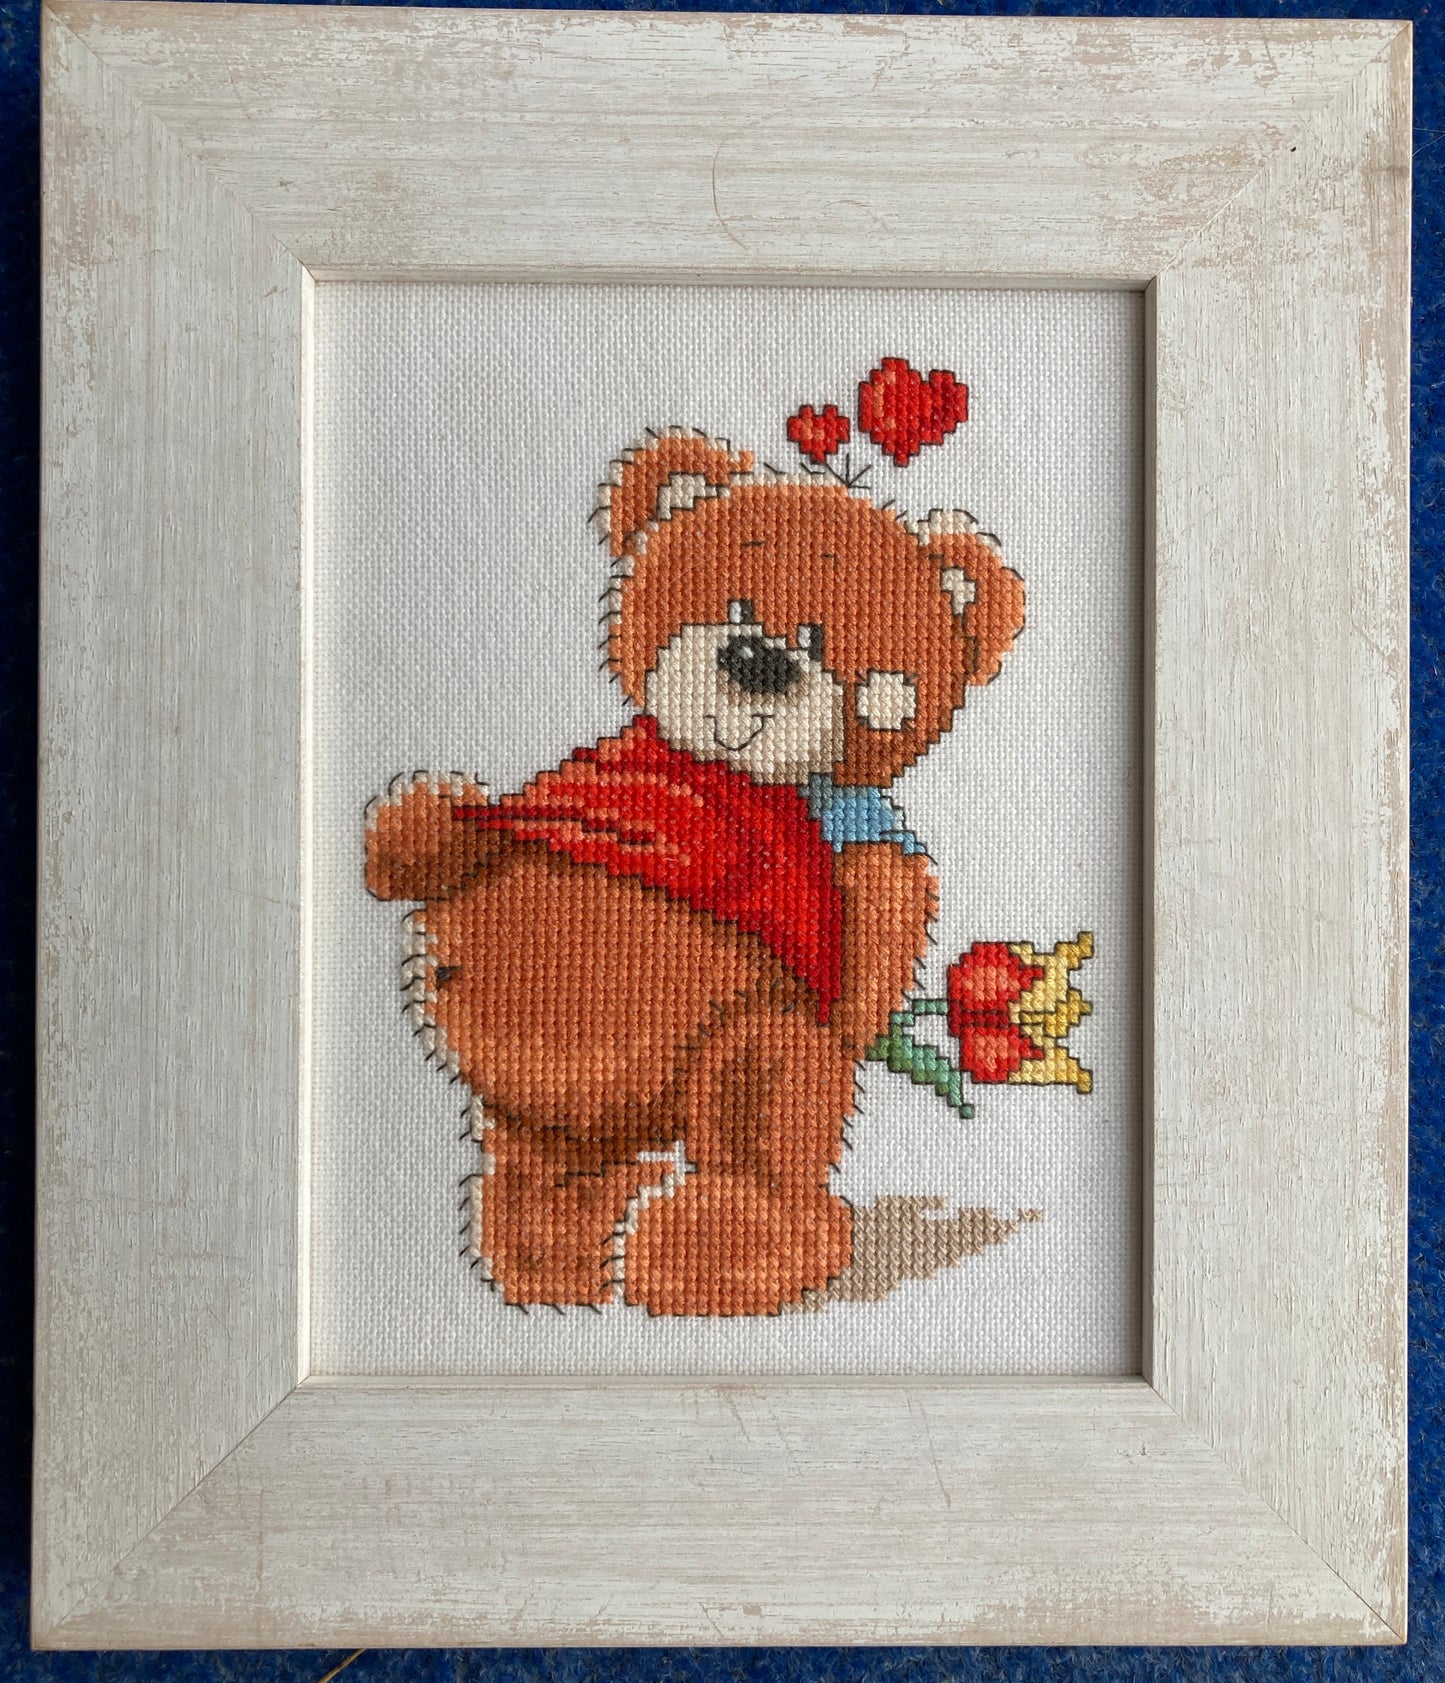 Framed Completed Cross-Stitch: Bollie the Bear series (LanArte) on Evenweave